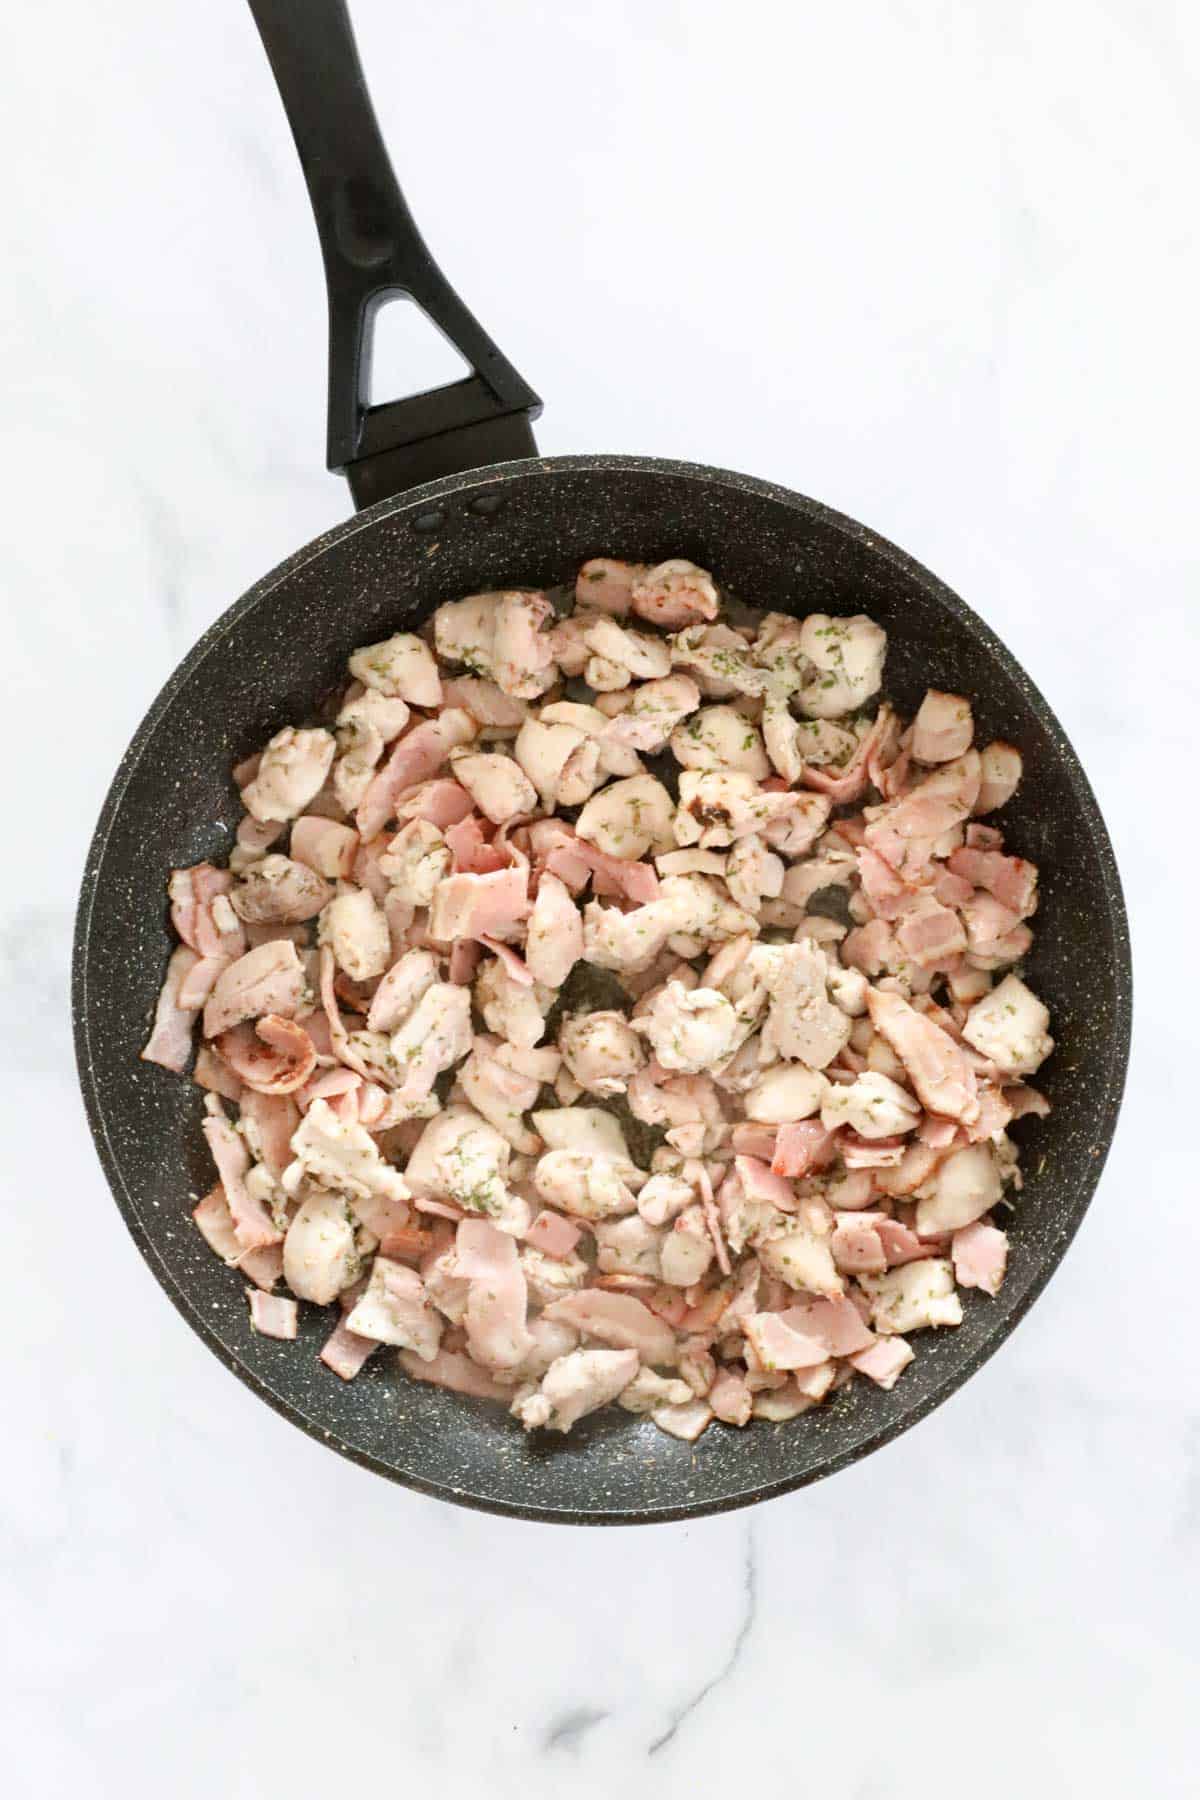 Browning chicken pieces in a frying pan.